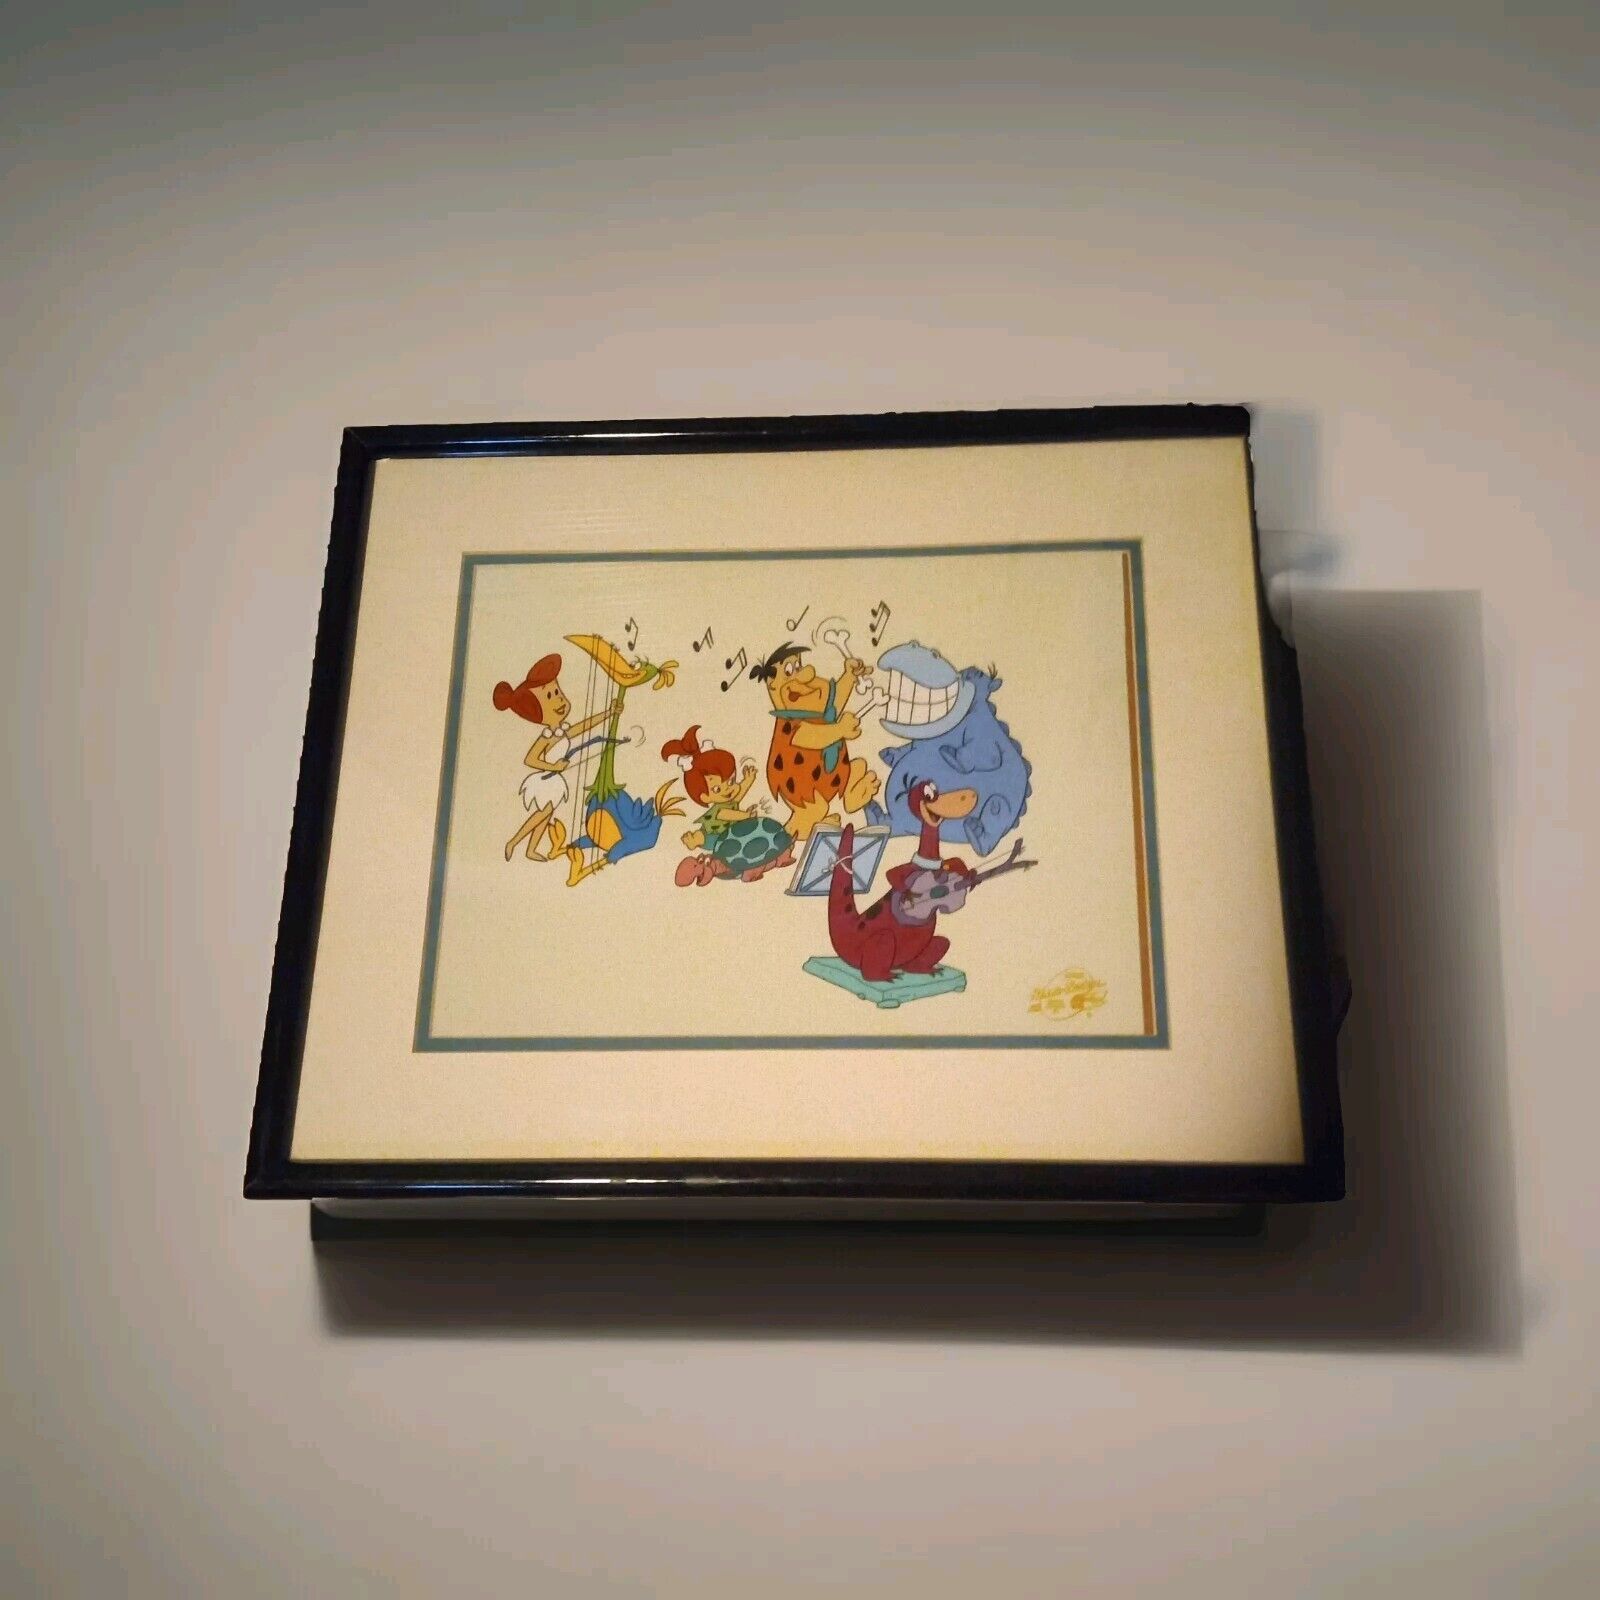 VINTAGE HANNA BARBERA  CELL FRAMED AND MATTED   16x20